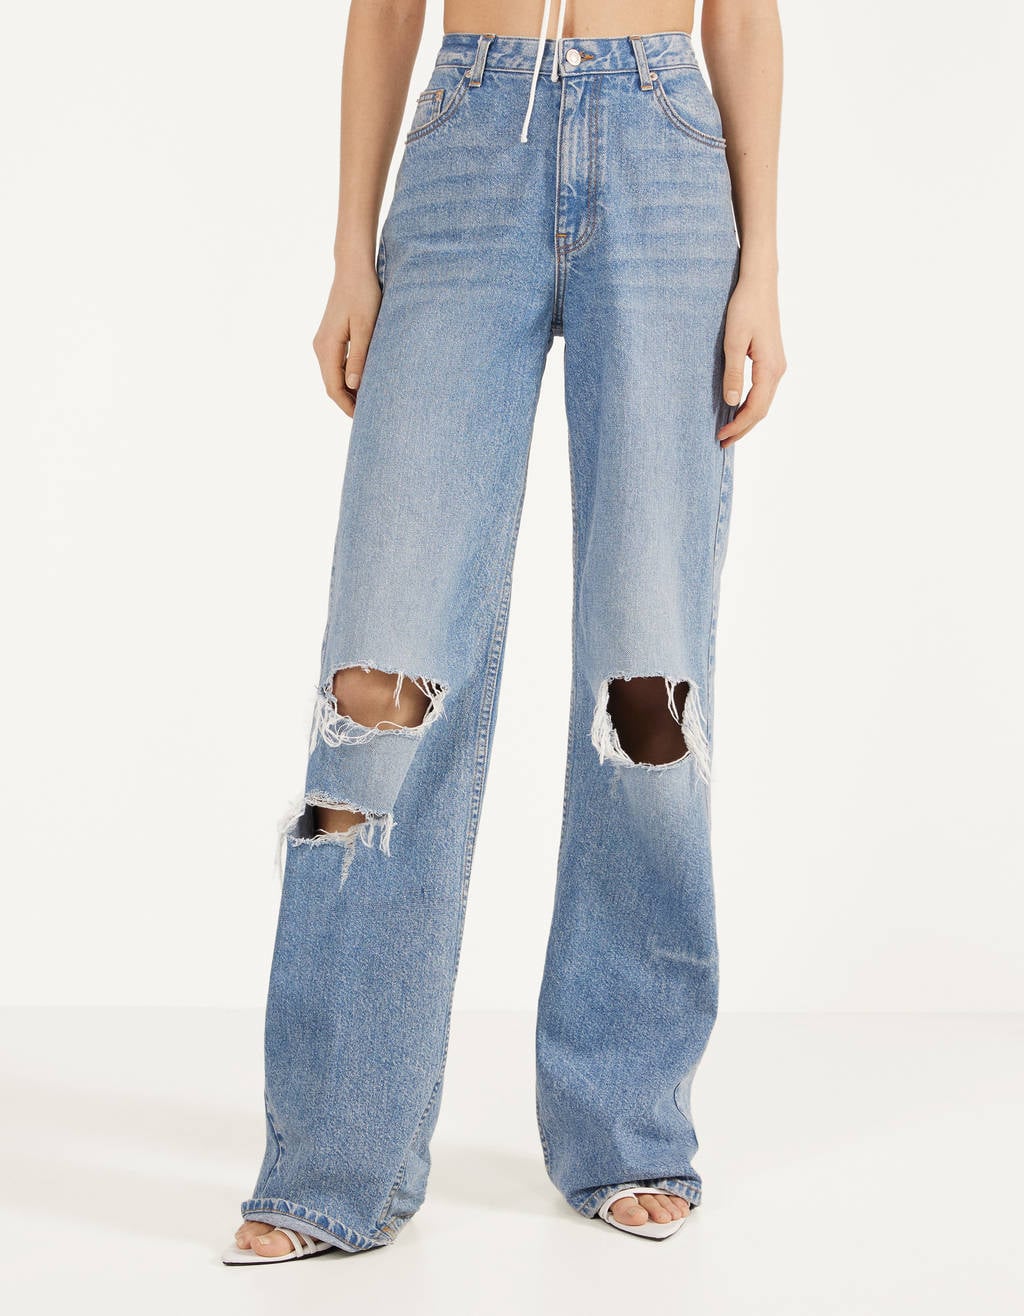 The 90s Trend Baggy Jeans 16 90s Closet Staples We Re Obsessed With Right Now Popsugar Fashion Photo 7